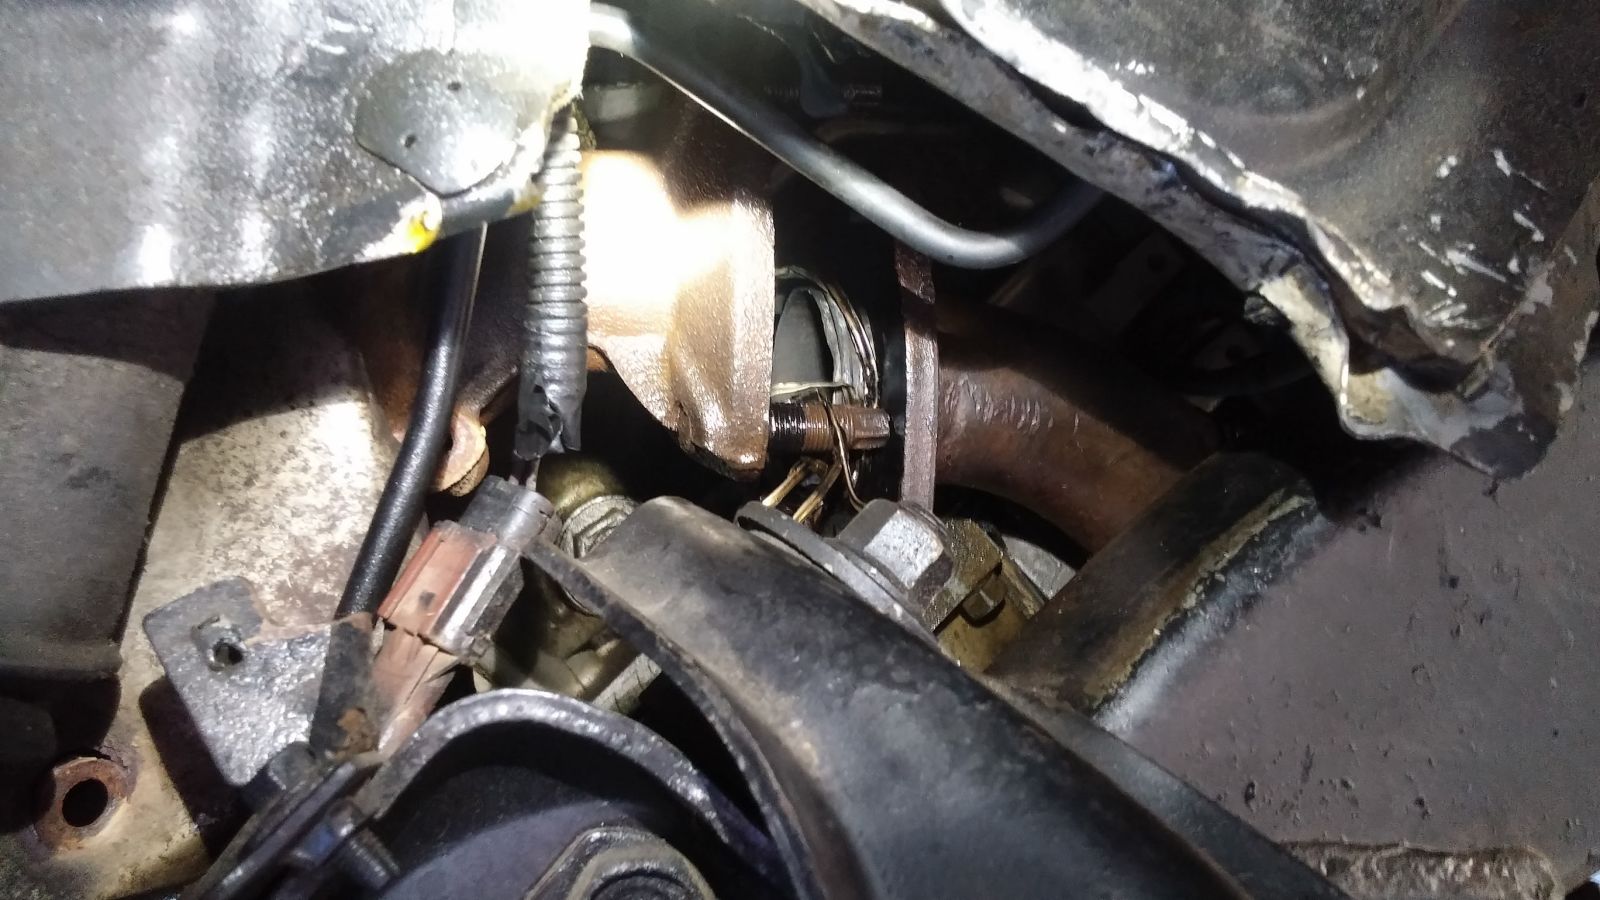 The previous owner had gasketed the exhaust using the wire from a bra.